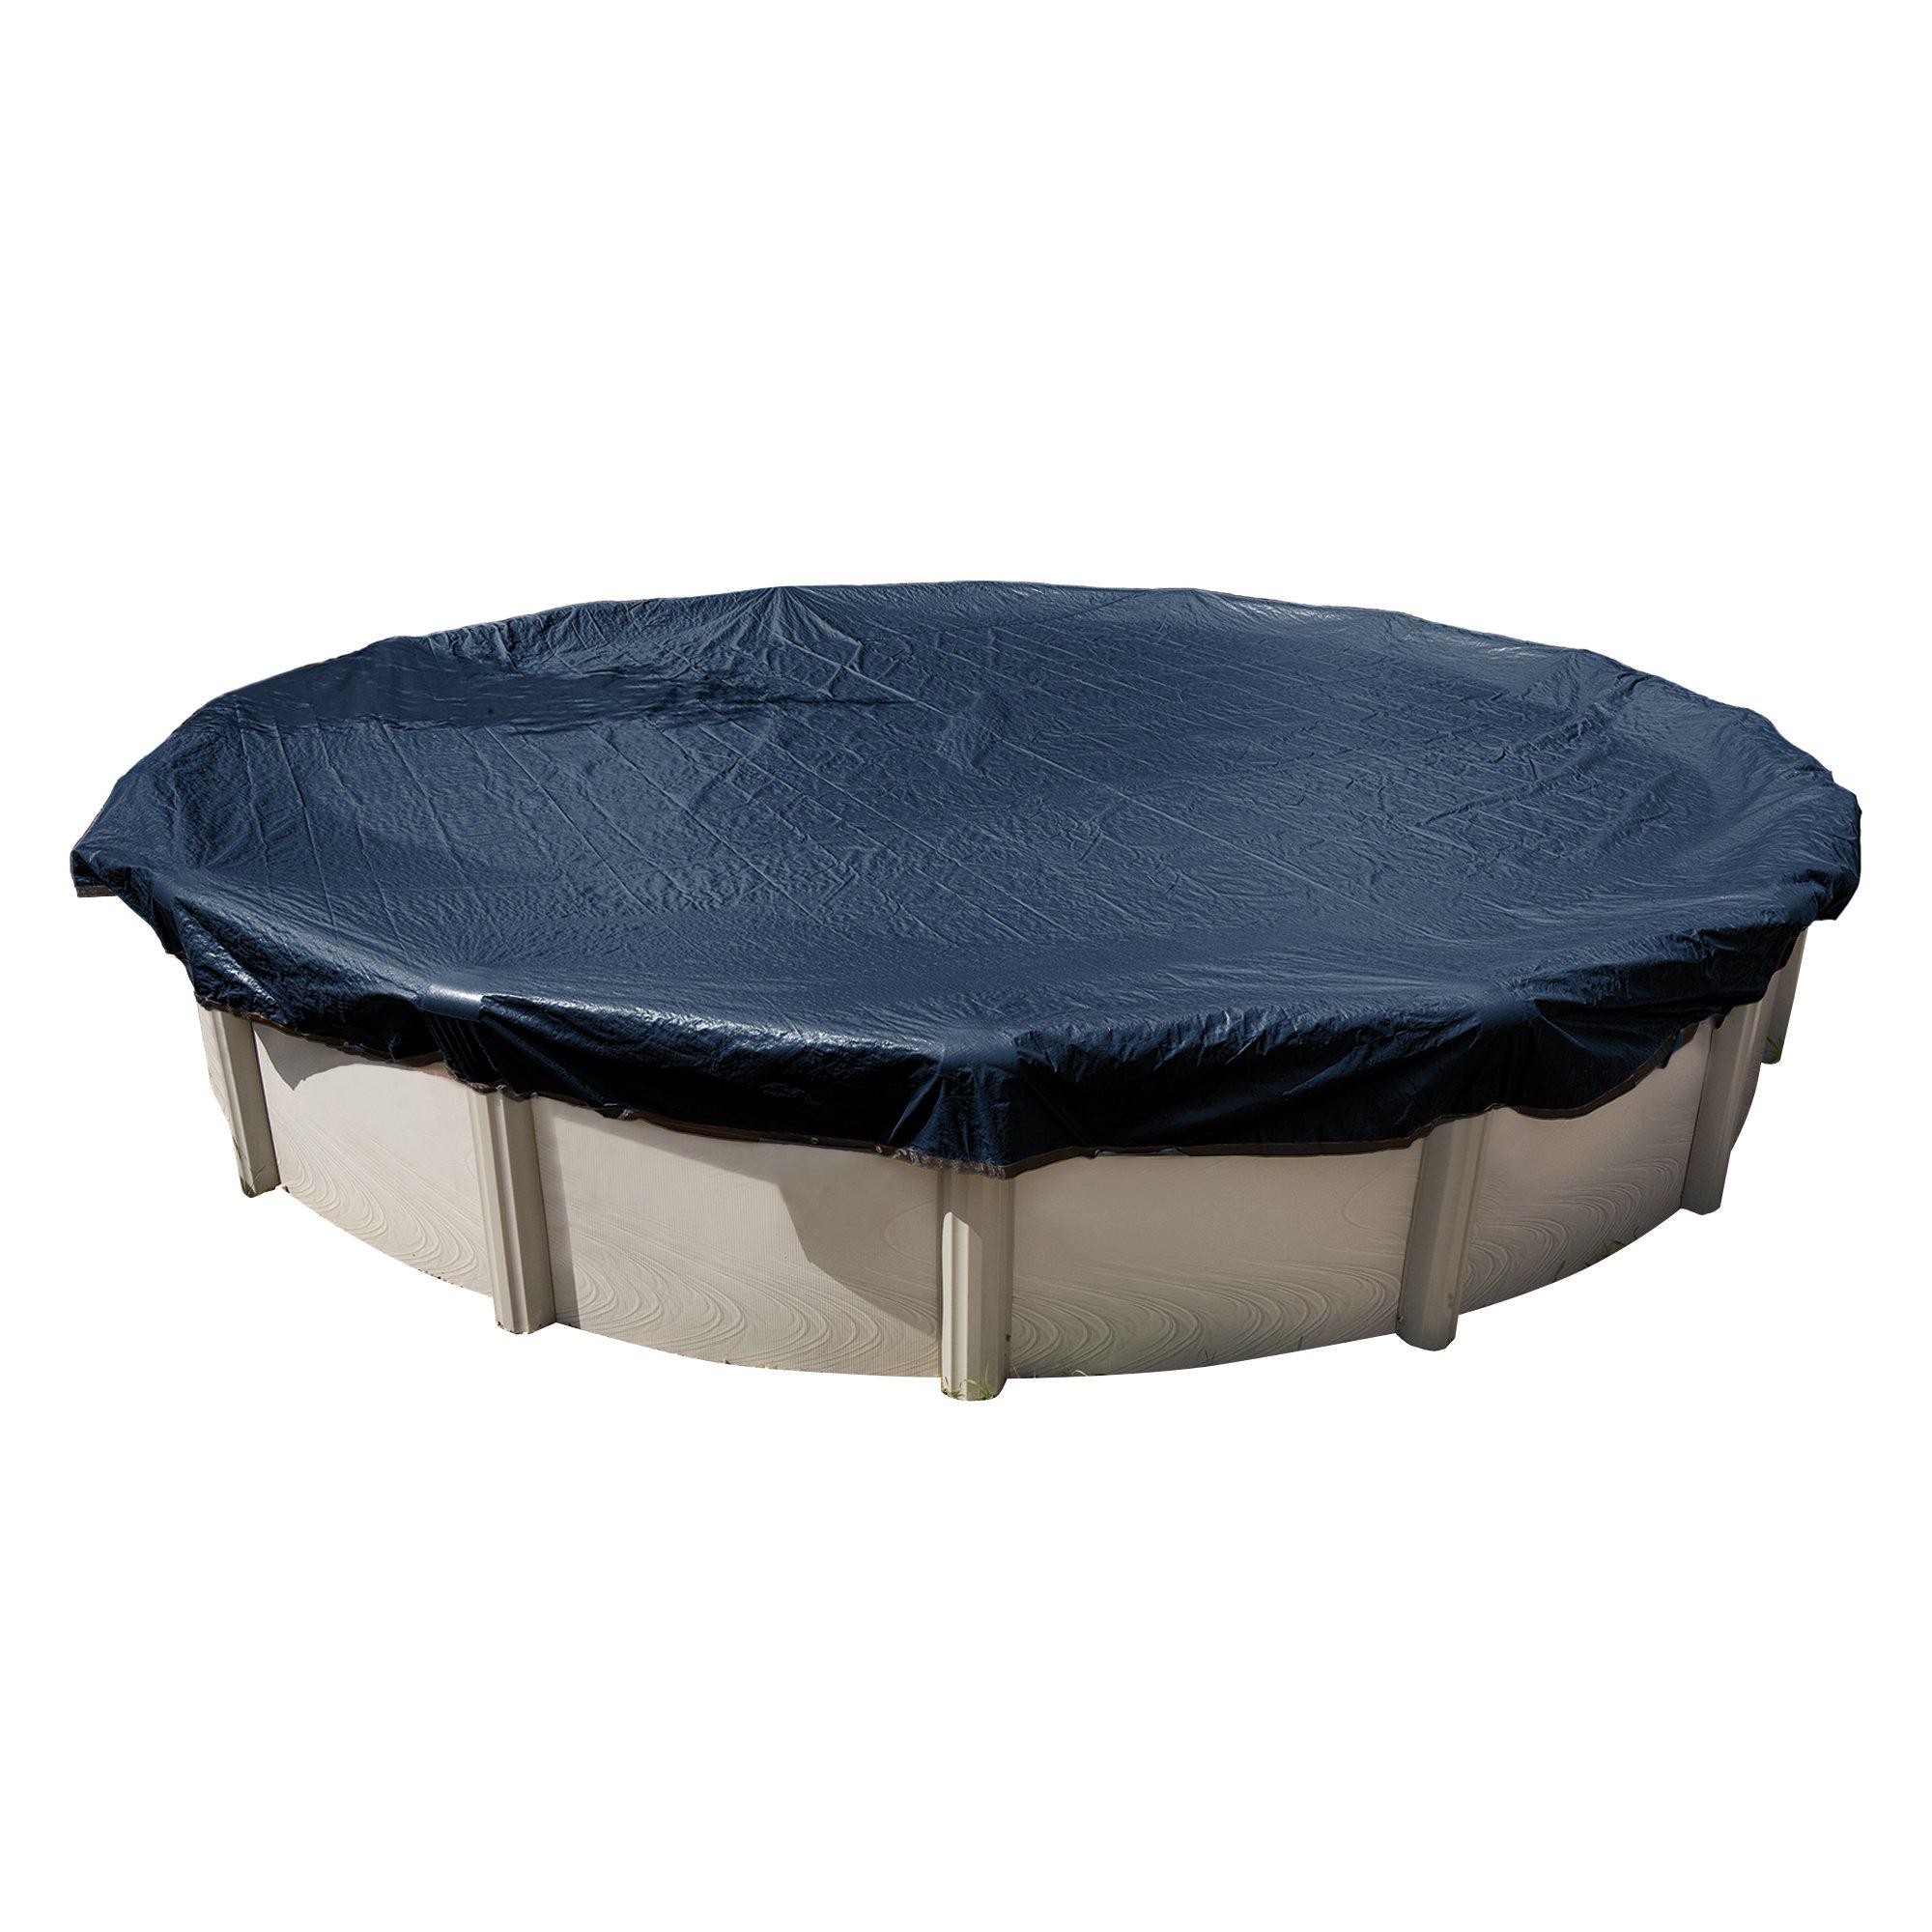 Midwest Canvas  30 Round Winter Pool Cover 8 Year Warranty Blue